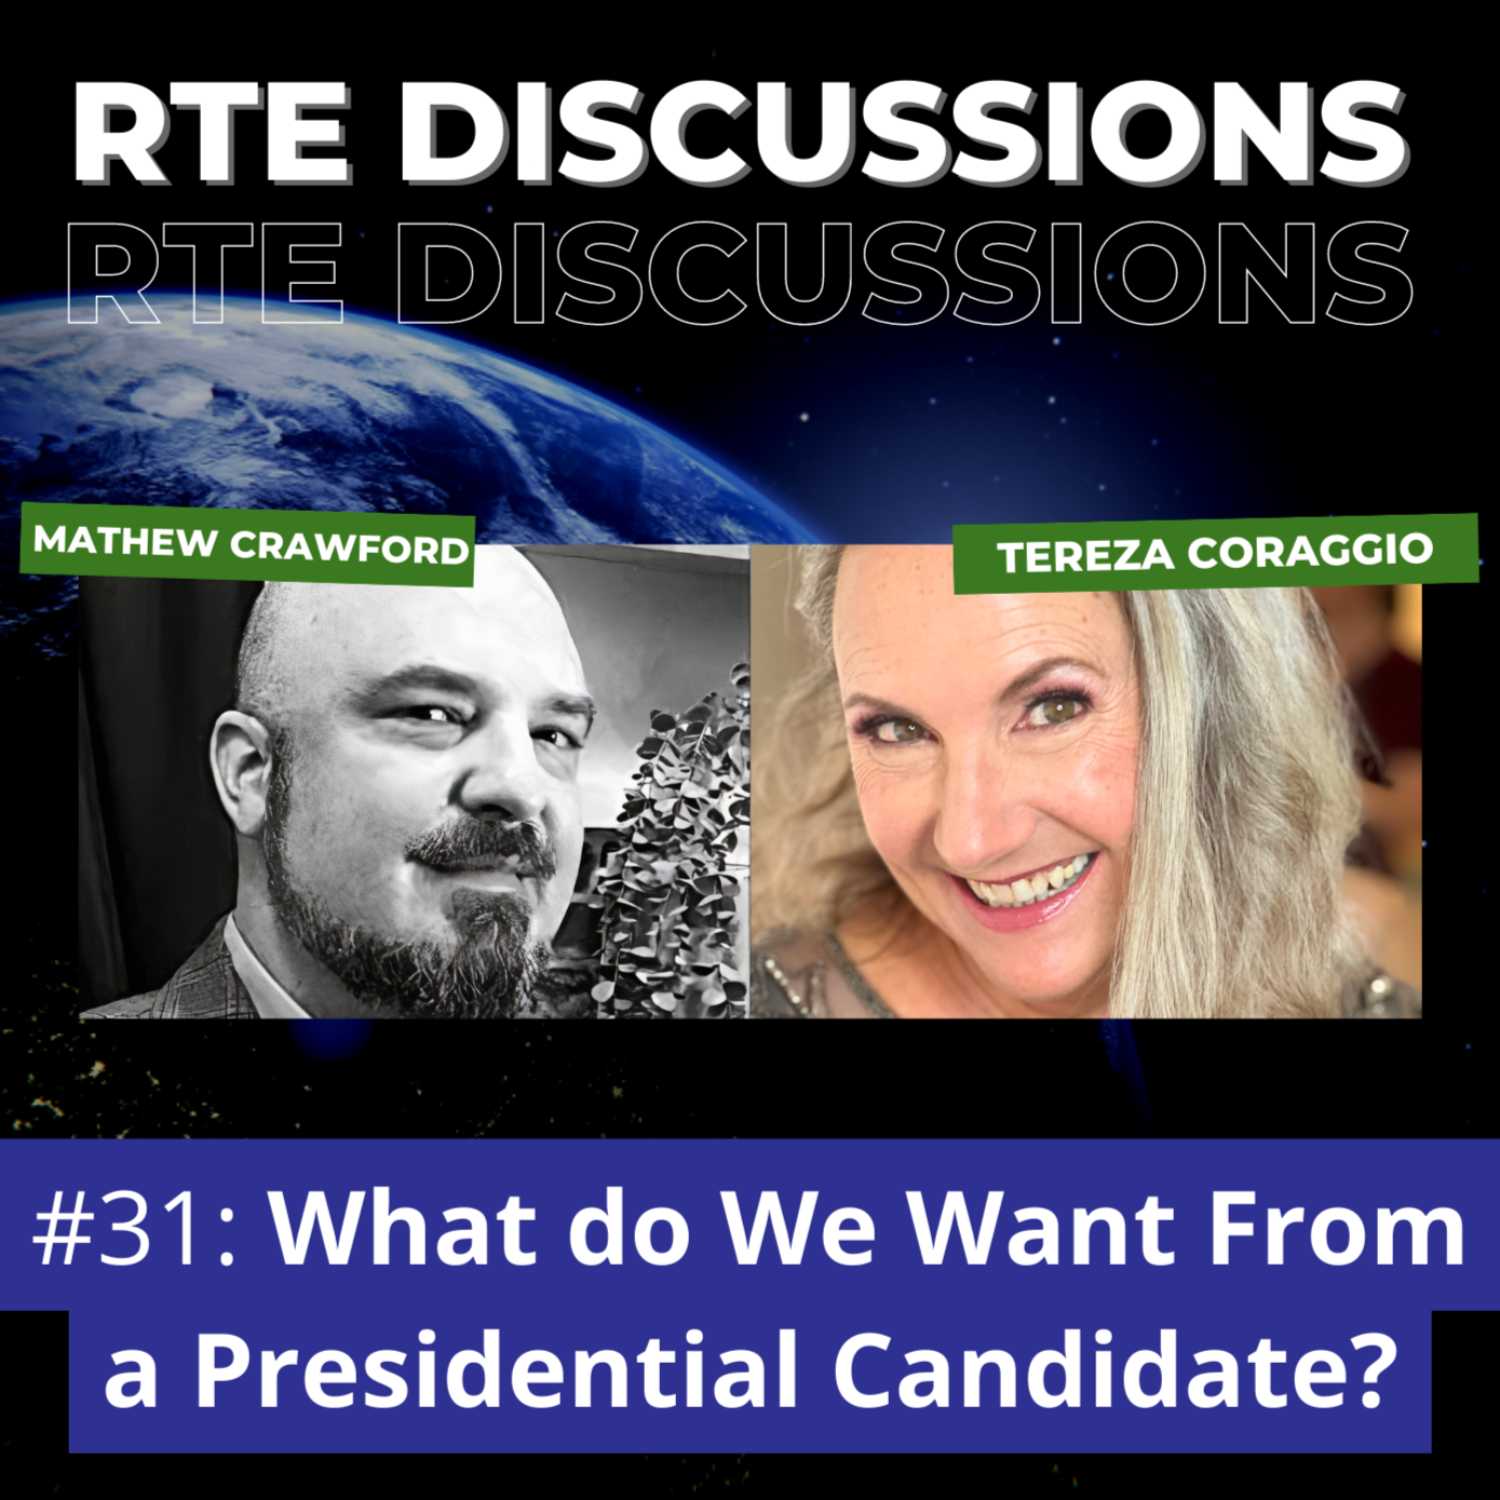 RTE Discussions #31: What do We Want from a Presidential Candidate? (w/ Tereza Coraggio)